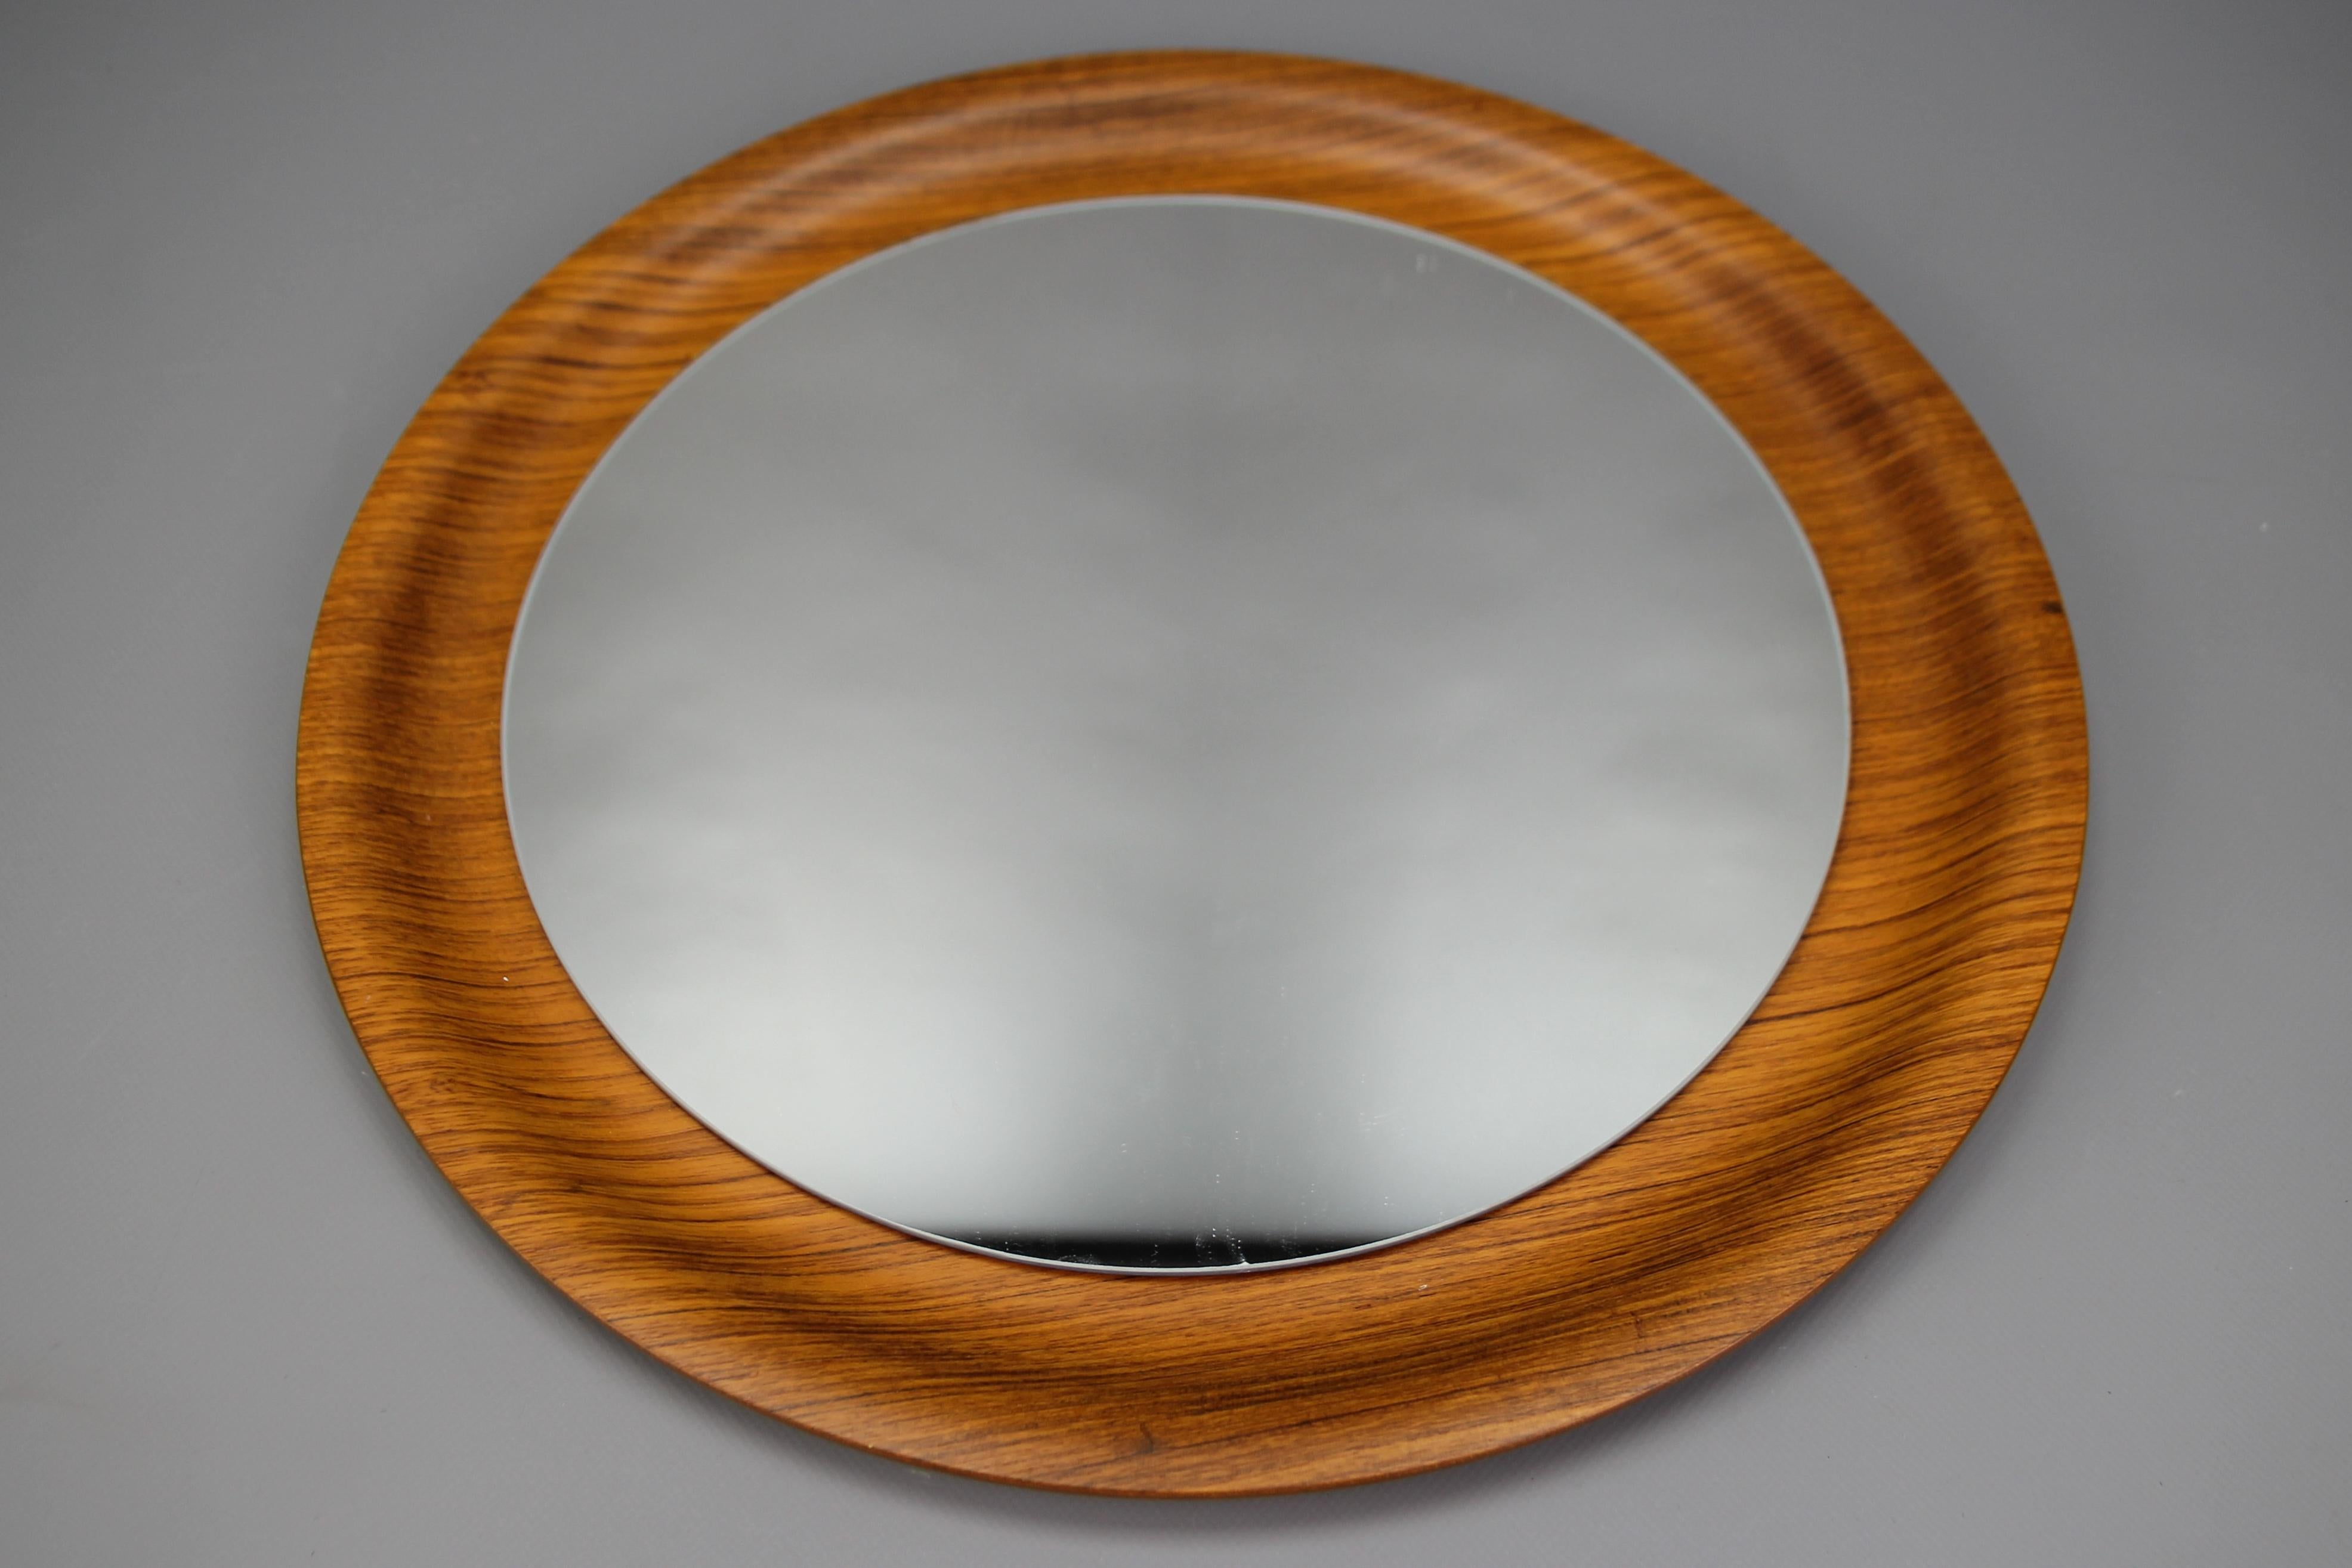 Mid-Century Modern round plywood frame wall mirror, Germany, circa the 1960s.
Vintage wall mirror on an adorable circular plywood curved shape edge frame. 
Dimensions: diameter: 45 cm / 17.71 in; depth: 2.5 cm / 0.98 in.
In good condition with